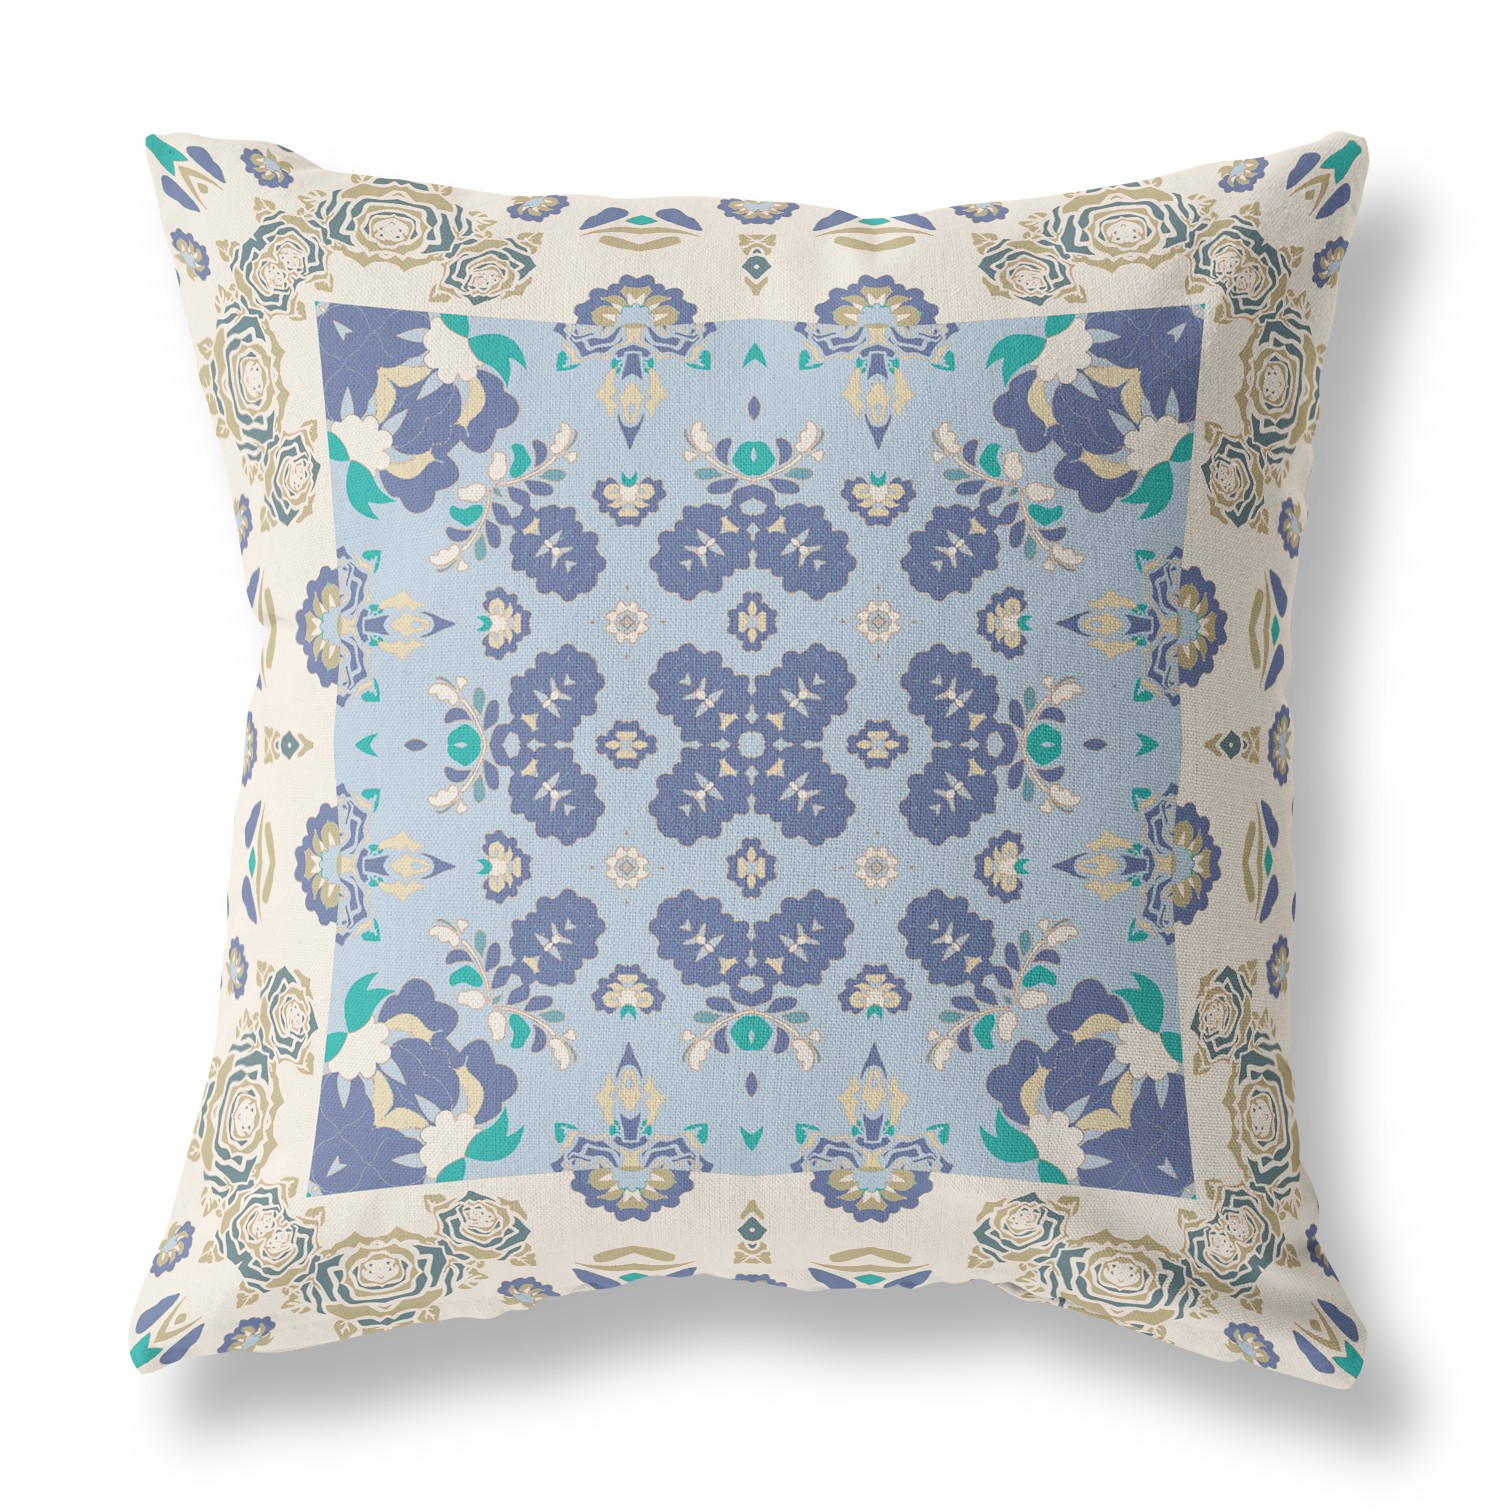 26” White Blue Rose Box Indoor Outdoor Zippered Throw Pillow-411138-1